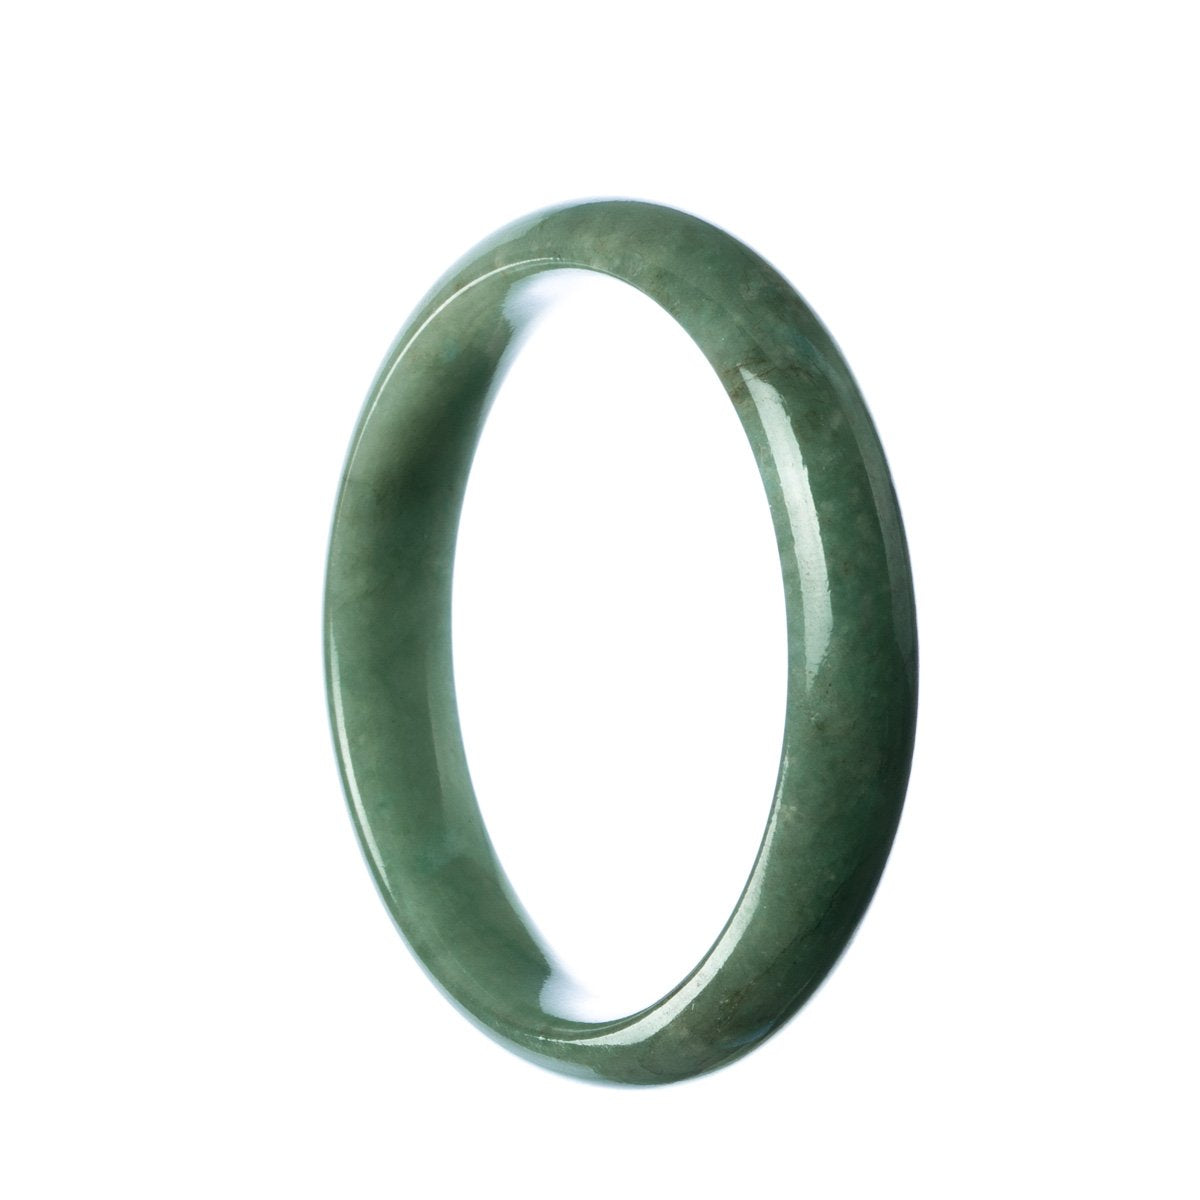 A close-up image of a green jade bracelet, with a traditional half-moon design, measuring 57mm in size.